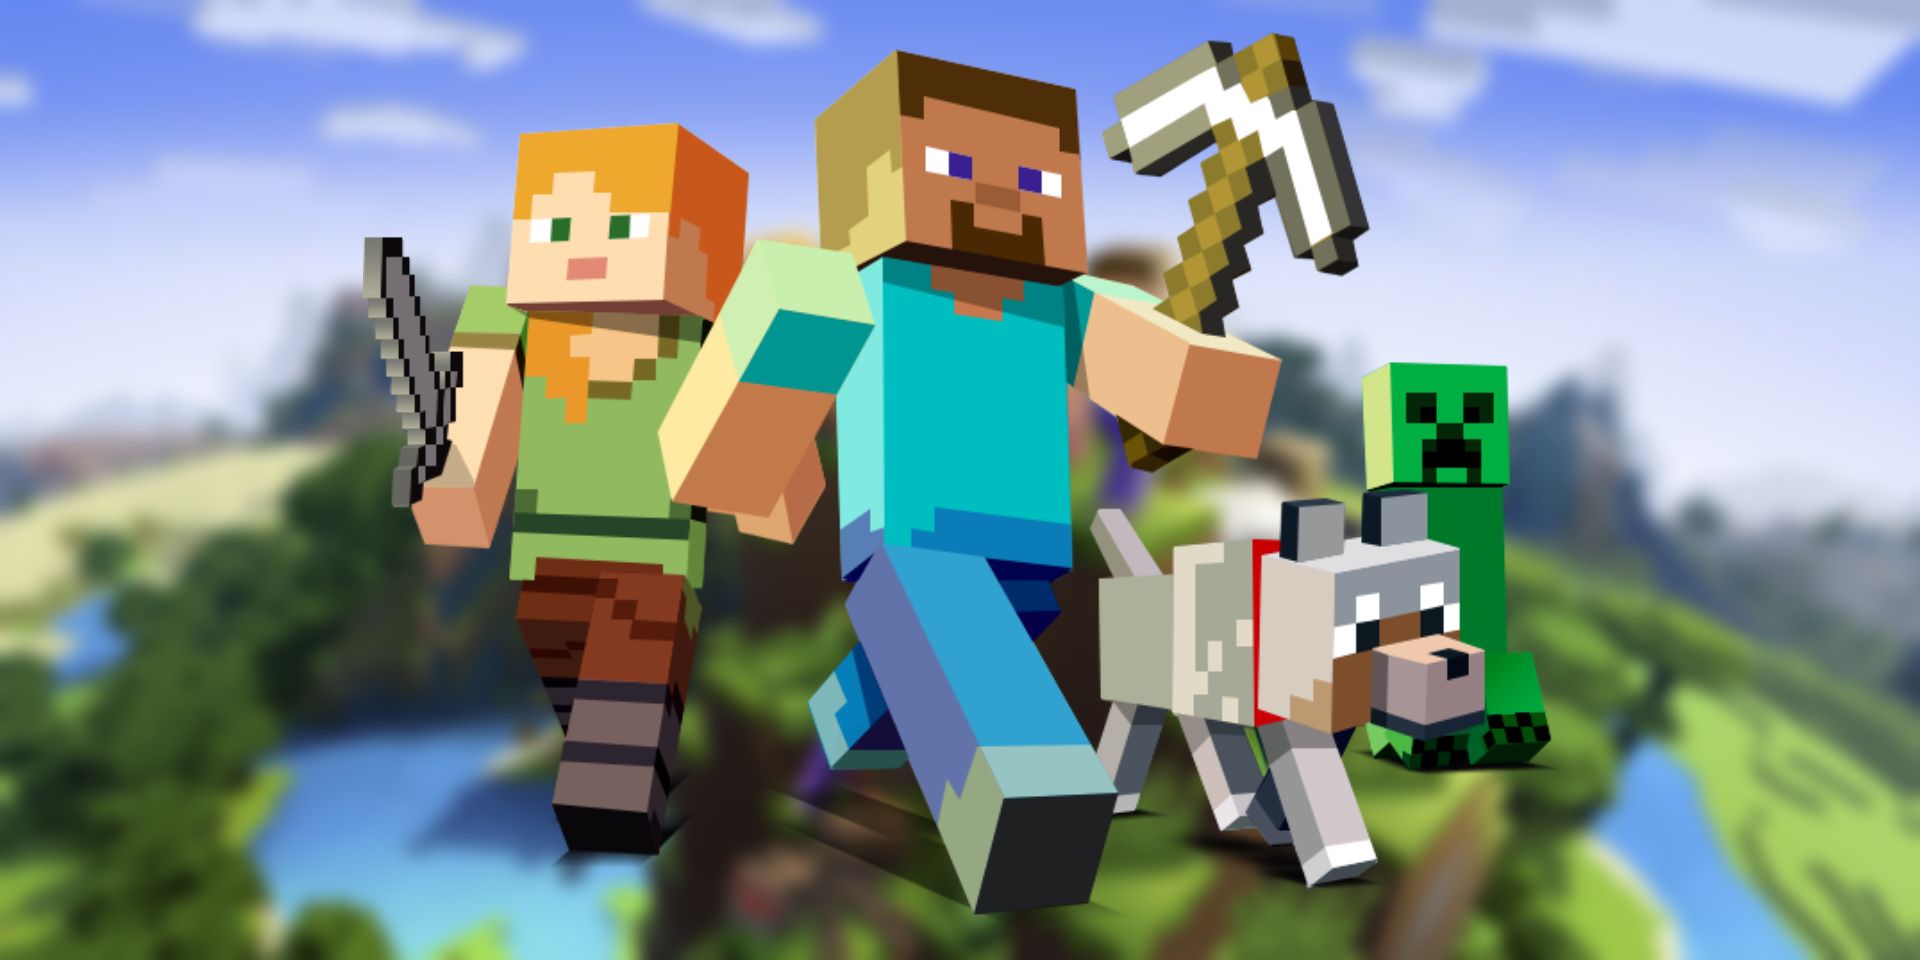 does minecraft have malware if you download it from google play store